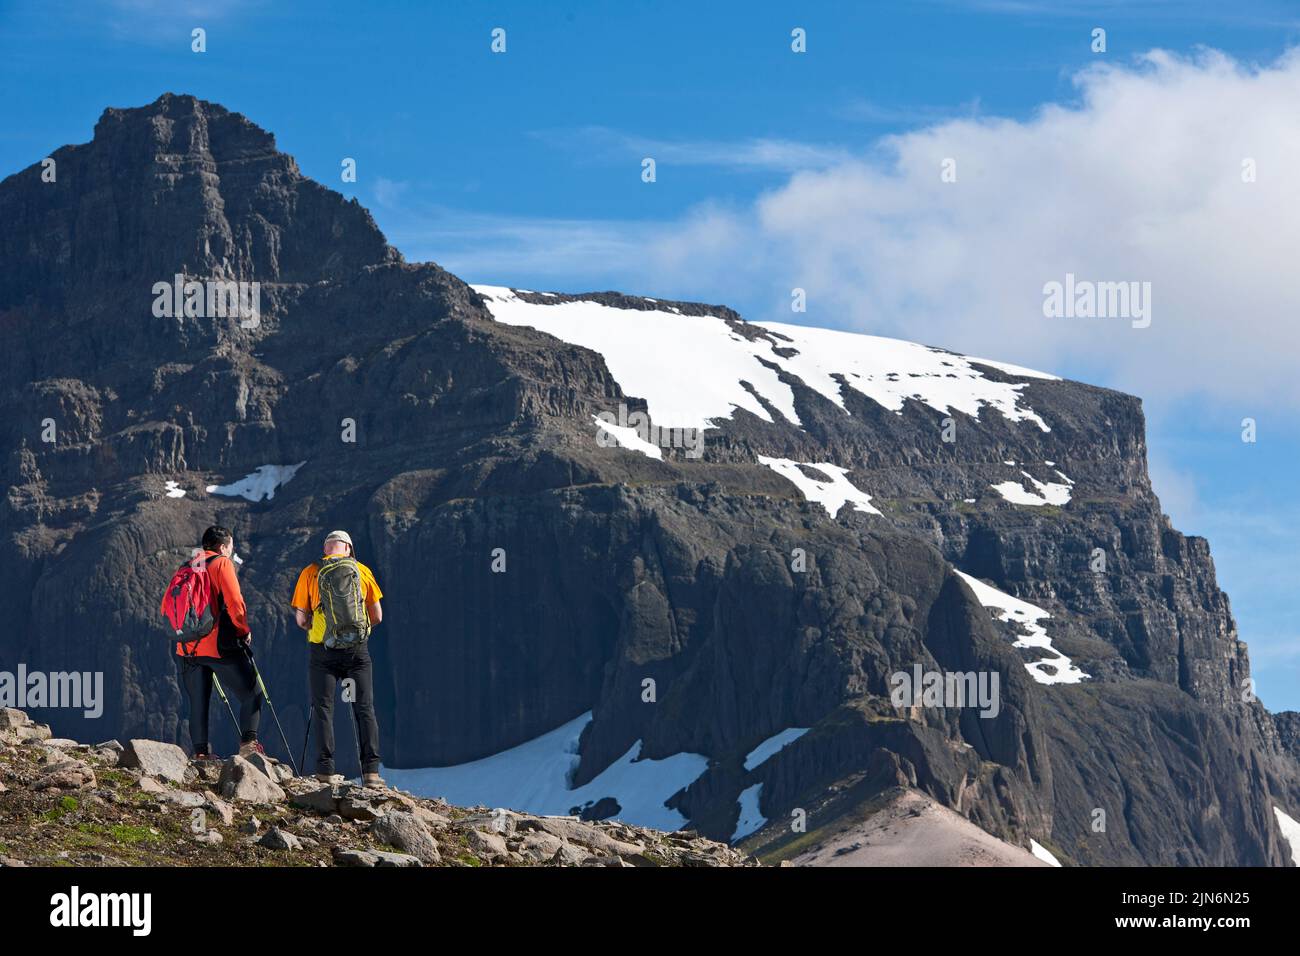 Hiking in the remote eastern fjords of Iceland Stock Photo